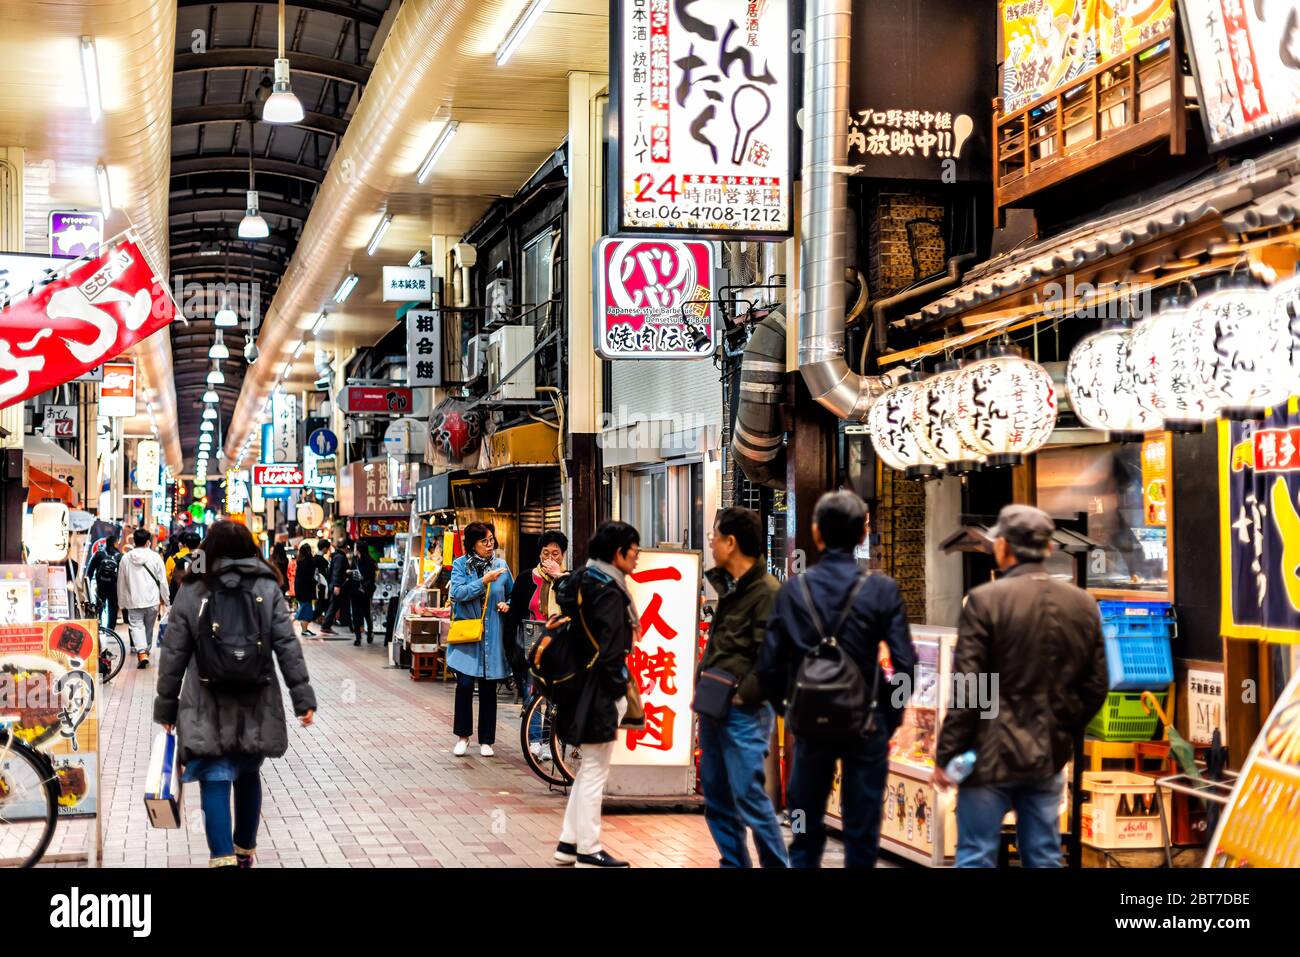 Osaka, Japan - April 13, 2019: Inside famous arcade covered street with people walking shopping with many signs at evening night with food restaurants Stock Photo